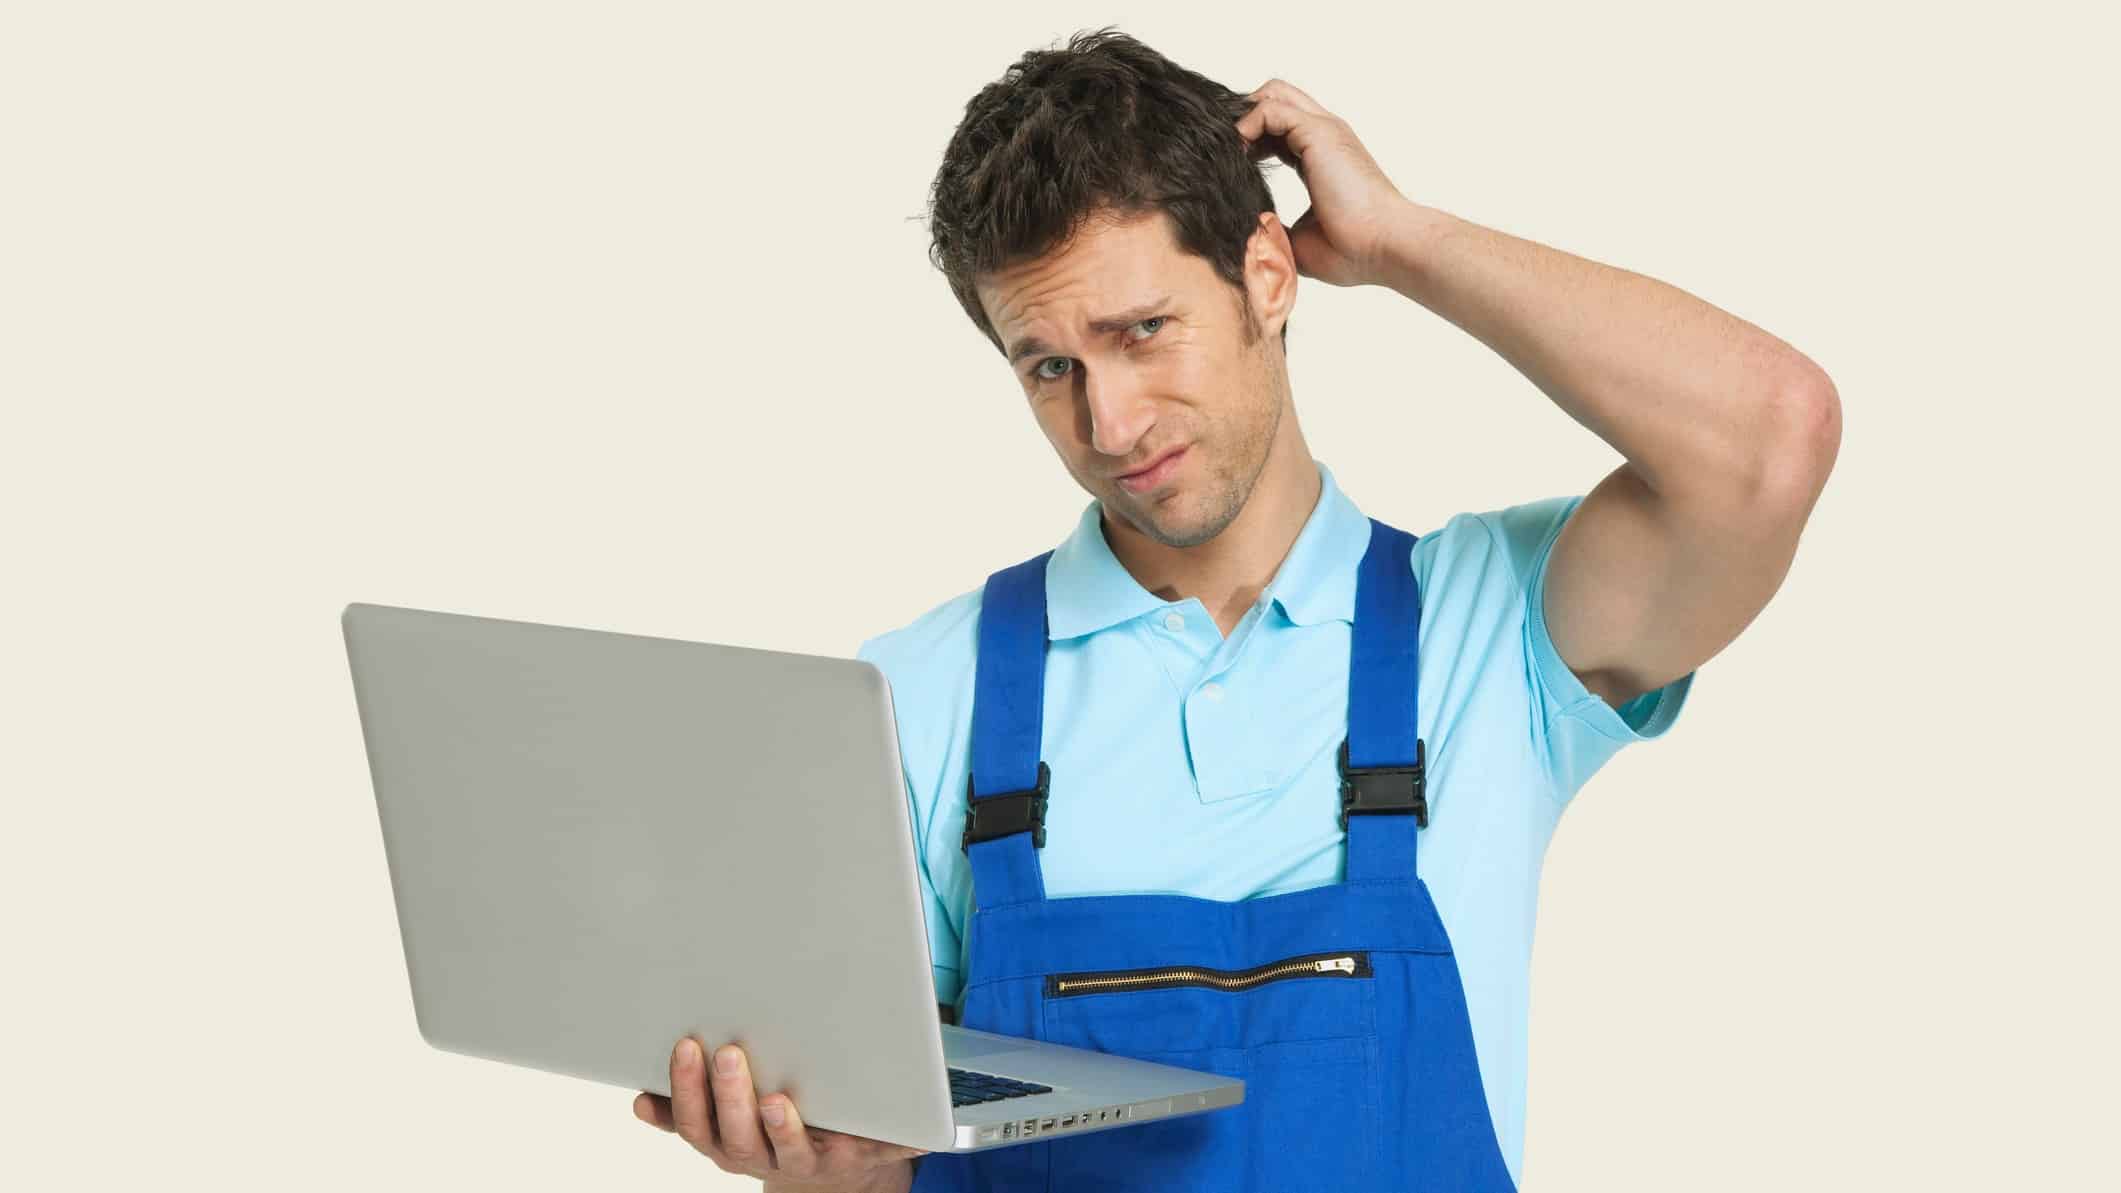 tradie holding a laptop computer displaying ASX share price and scratching his head looking confused